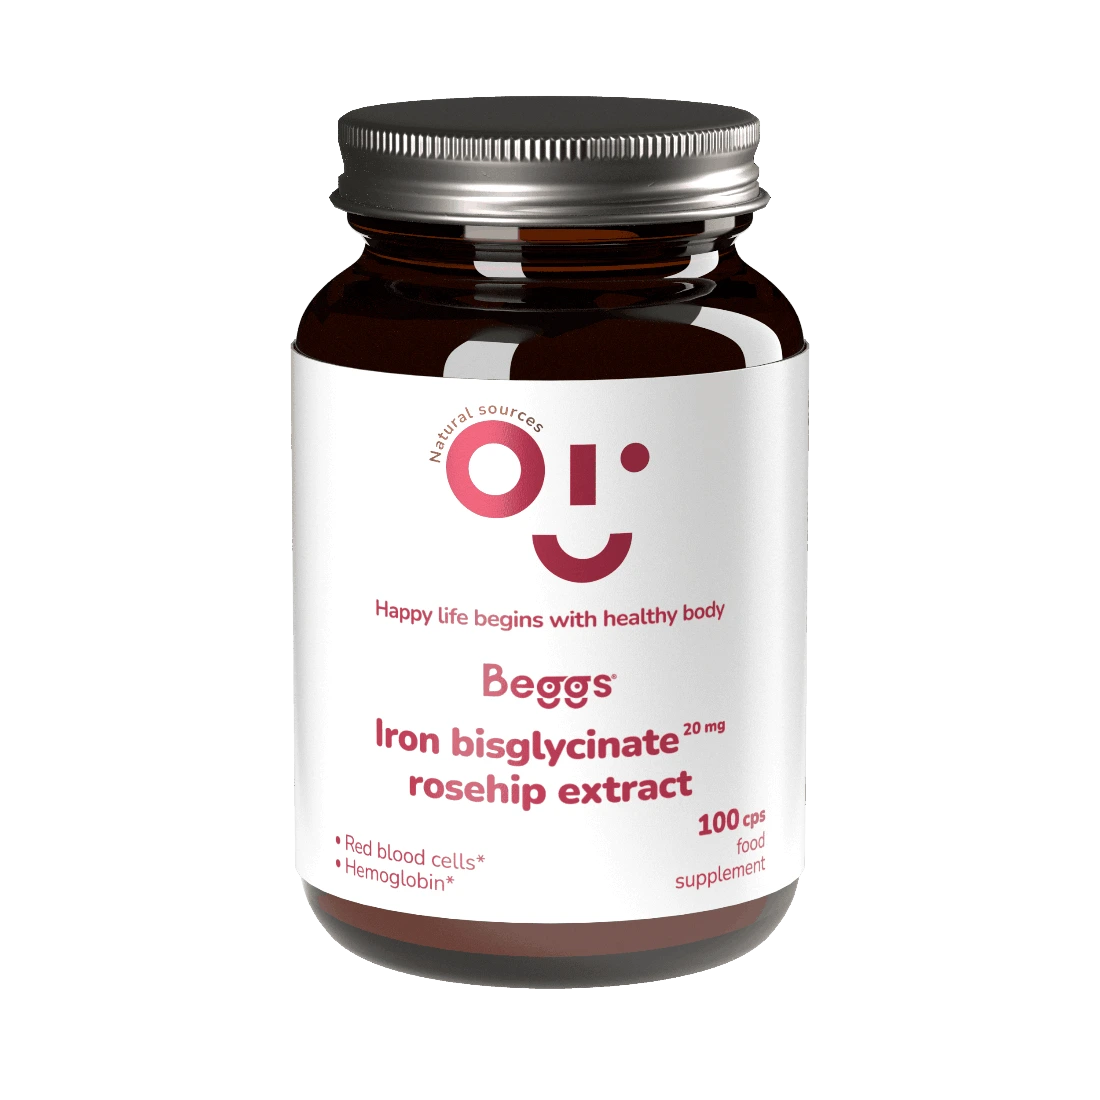 BEGGS_Iron_bisglycinate_20_mg_rosehip_extract_200ml